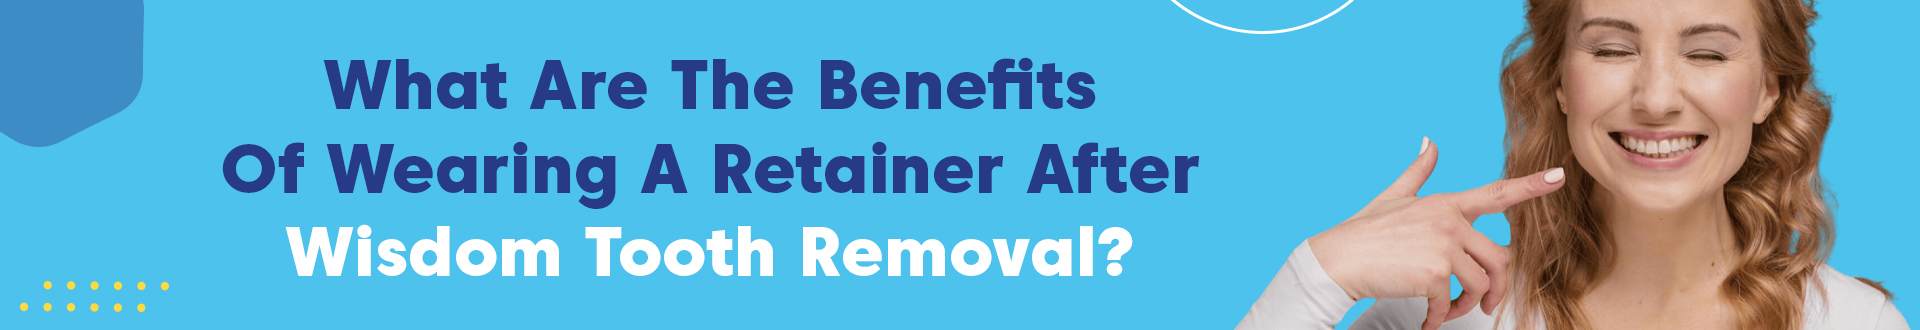 Benefits Of Wearing A Retainer After Wisdom Tooth Removal